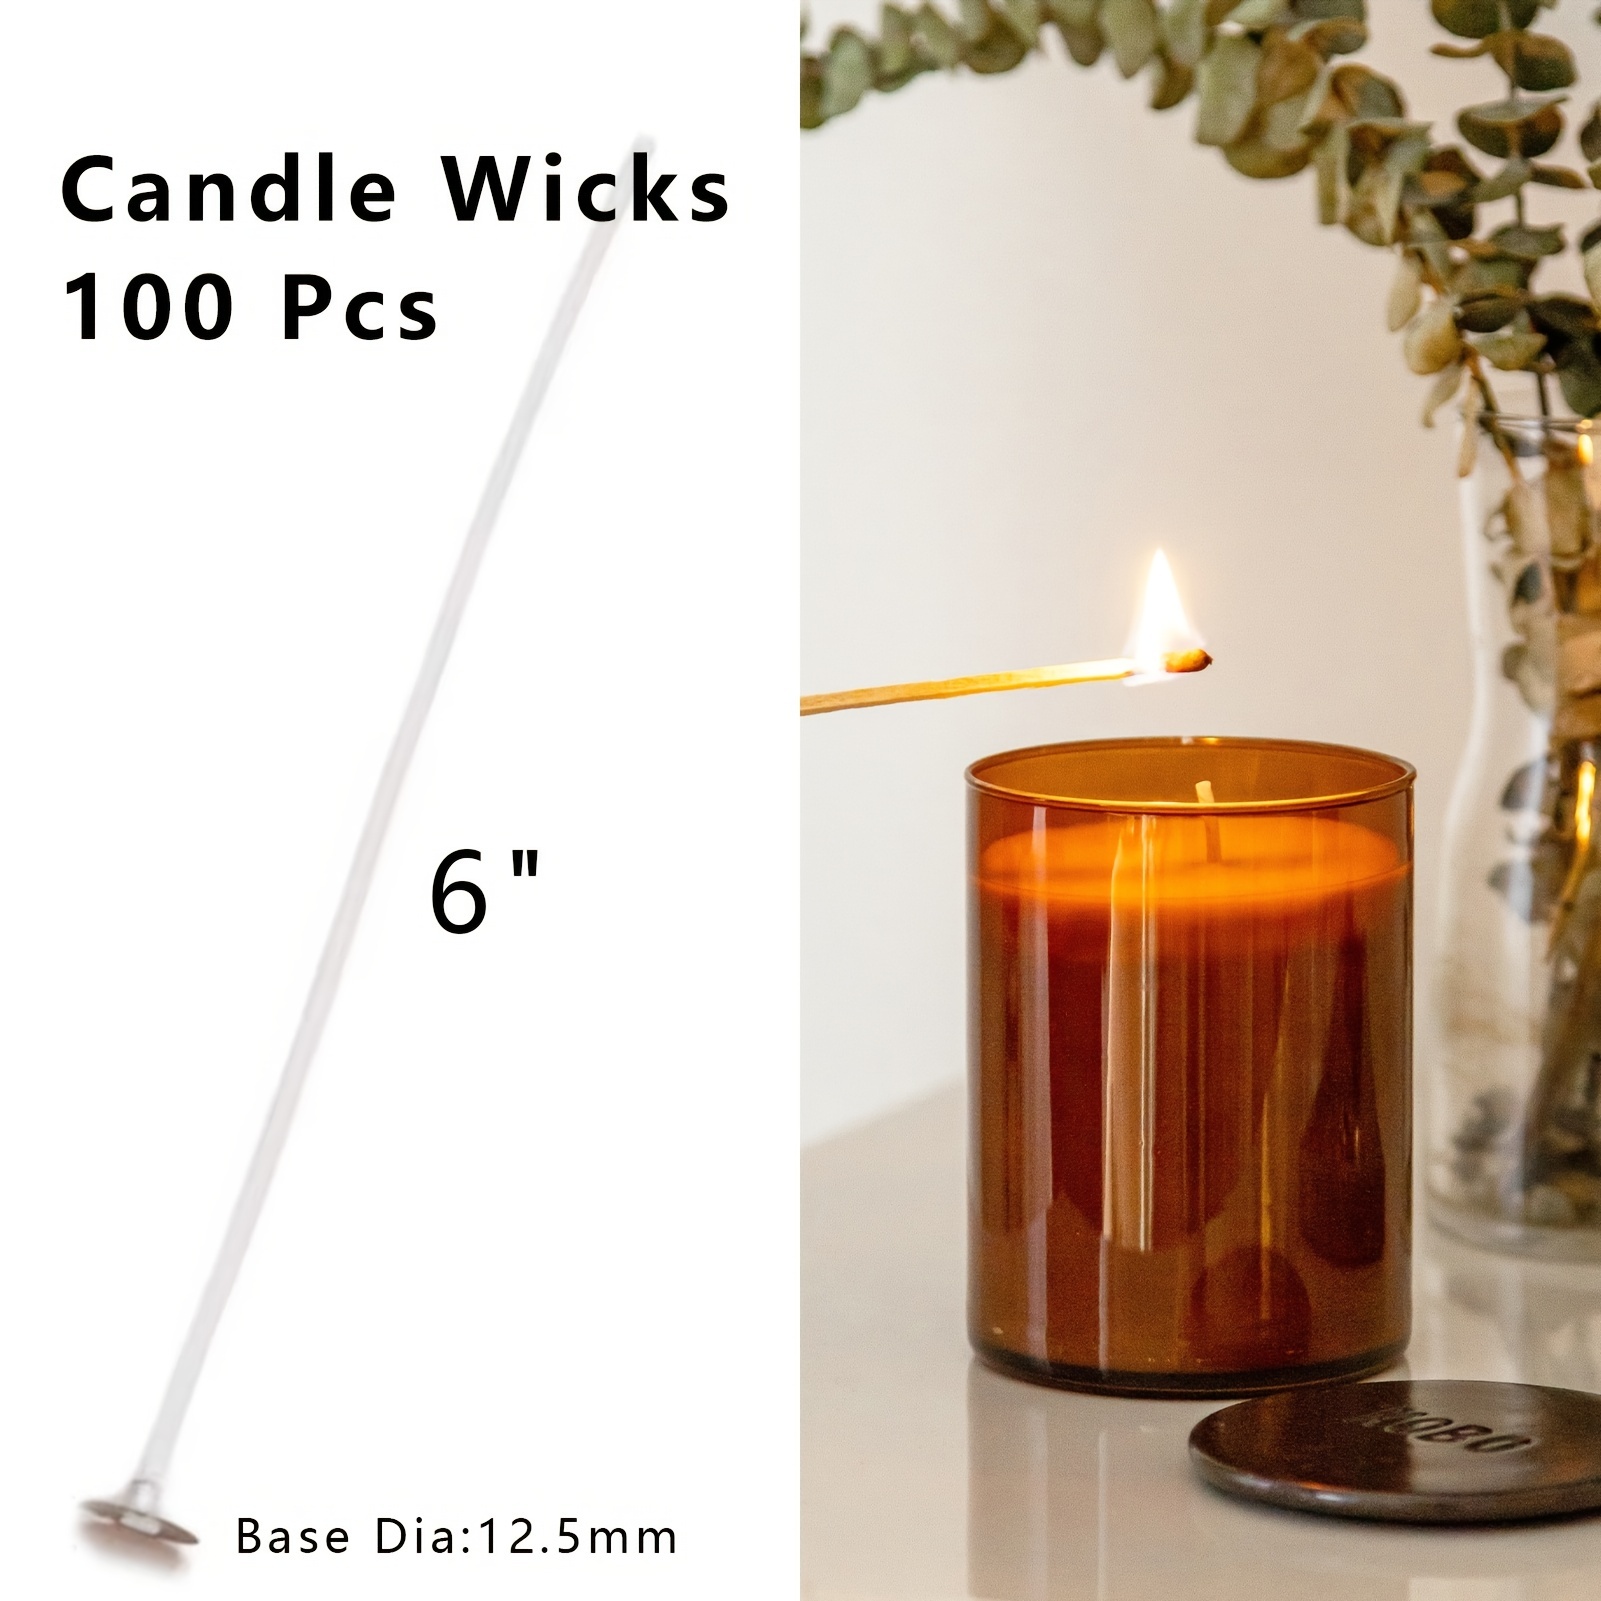 50 Pcs Wooden Candle Wicks Wood Candle Wicks for Candle Making DIY 5 Sizes  : : Everything Else